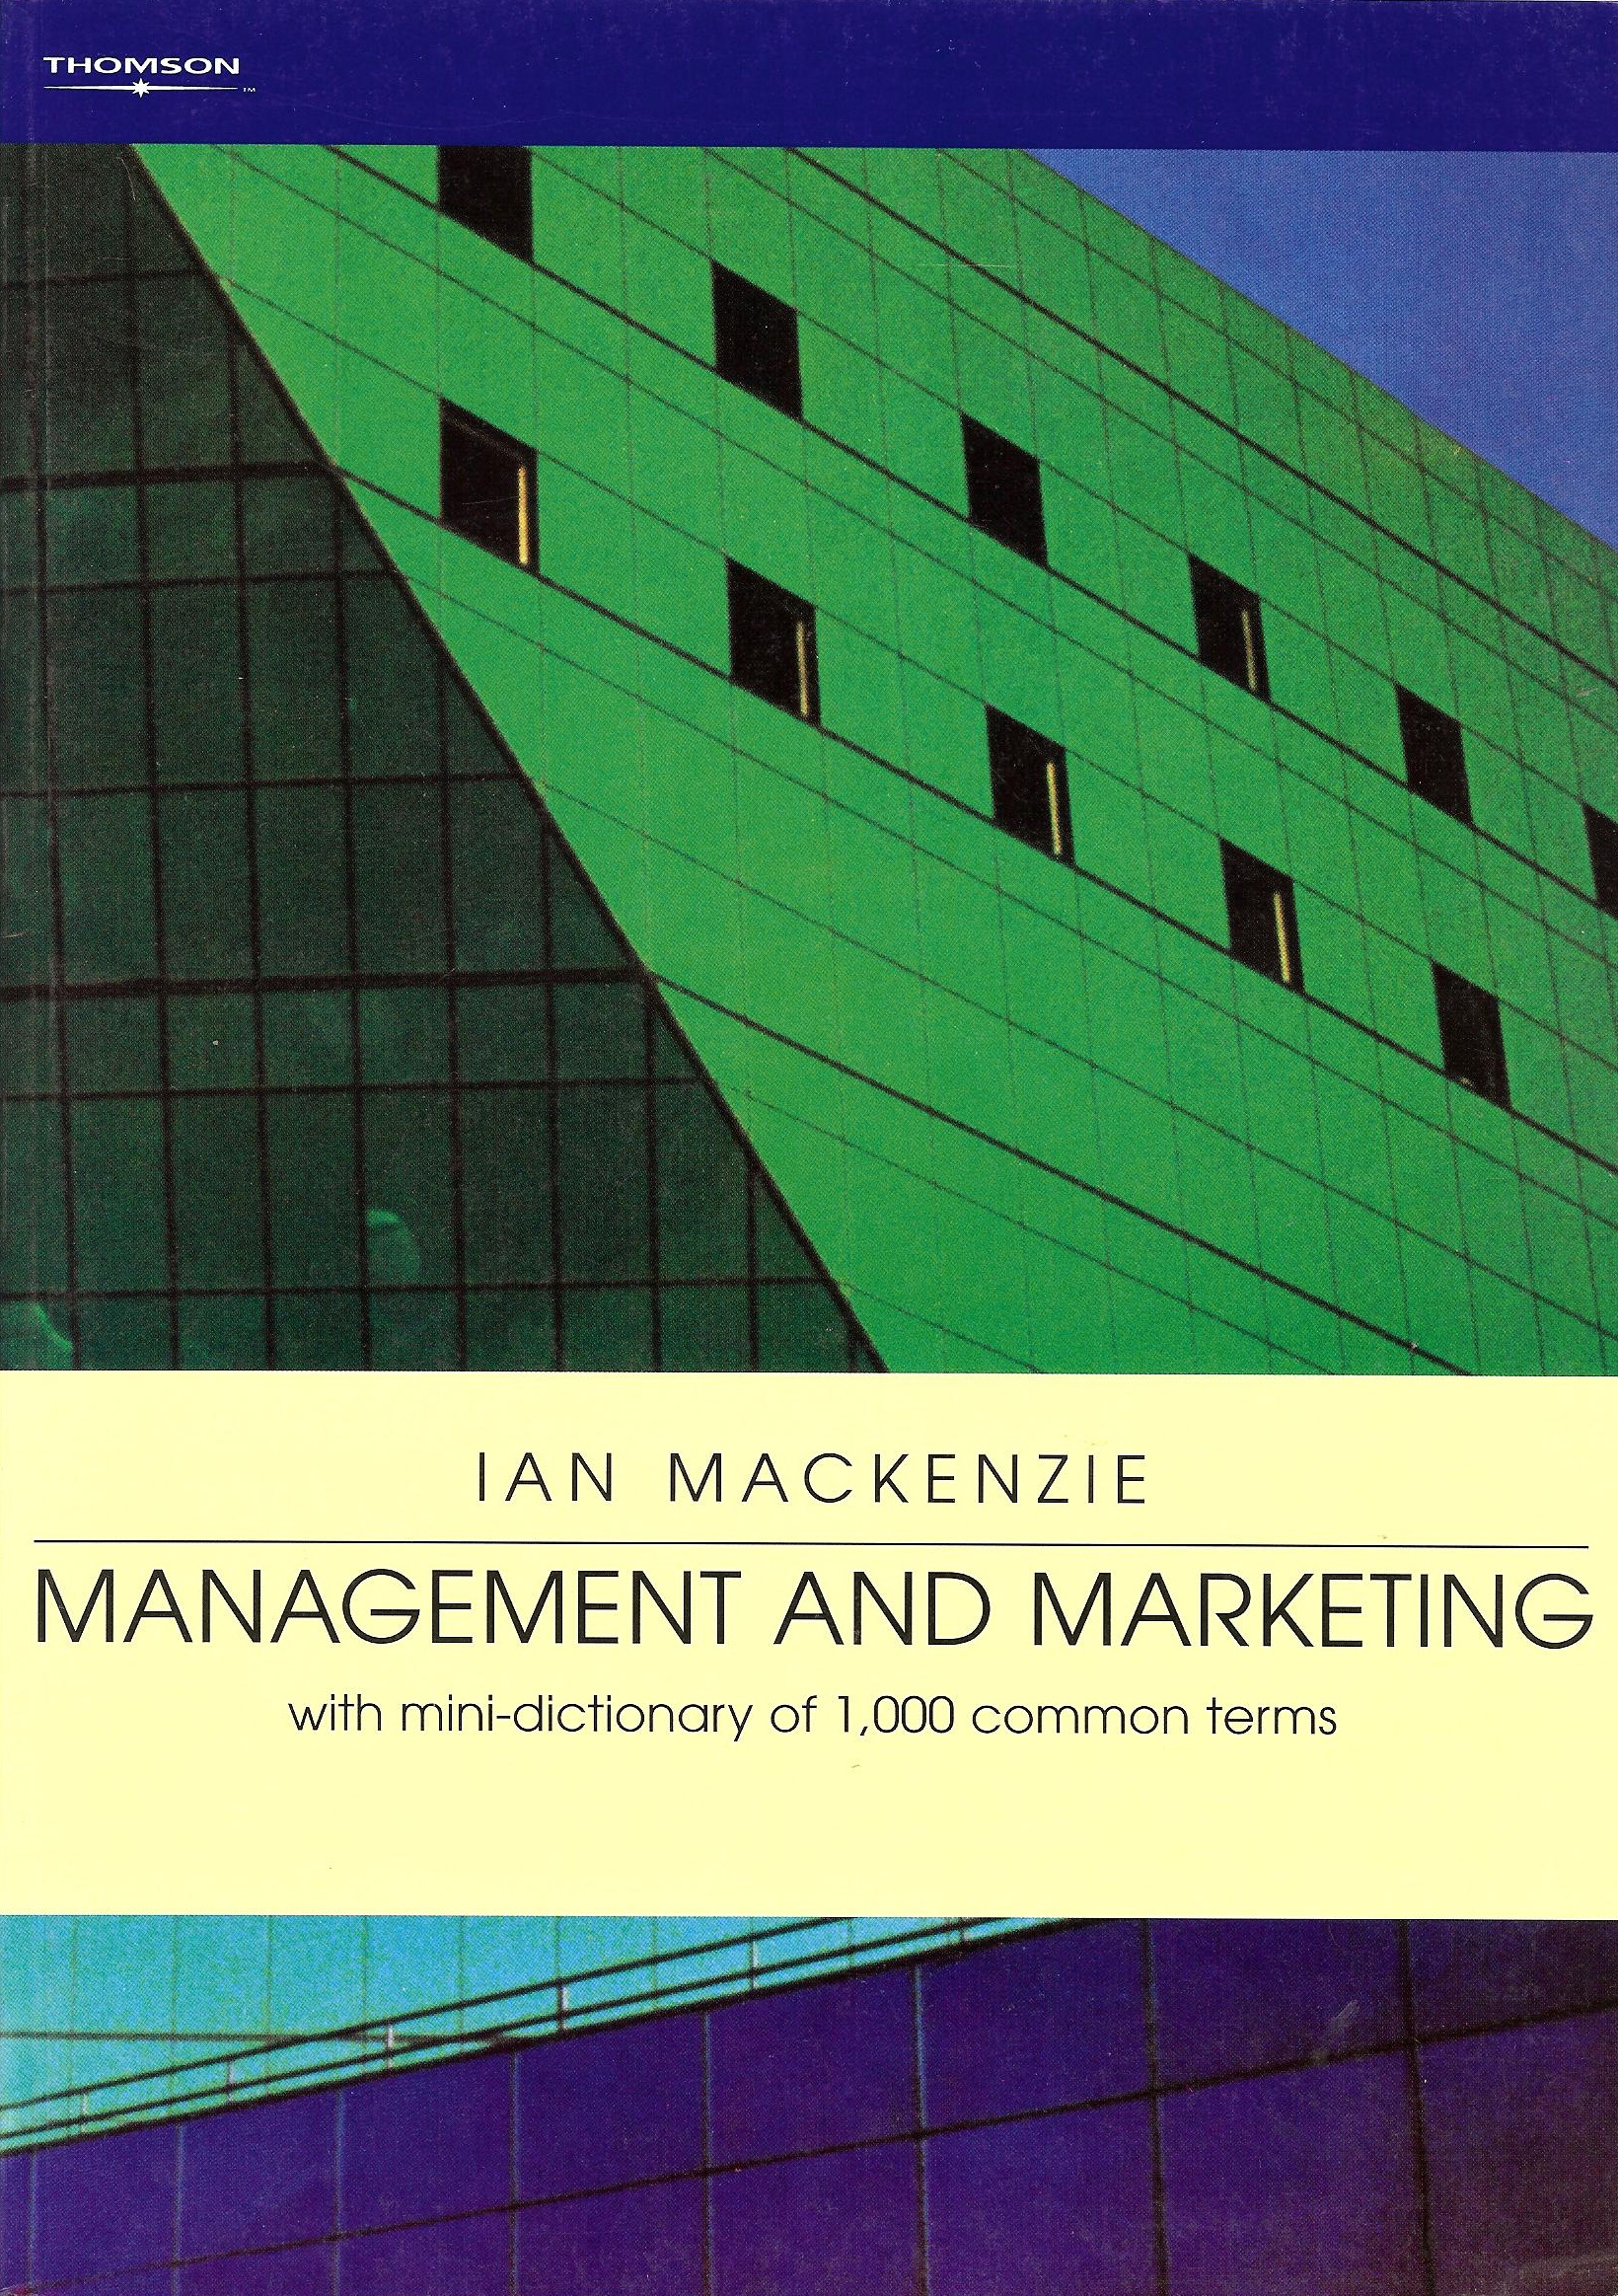 Management and Marketing